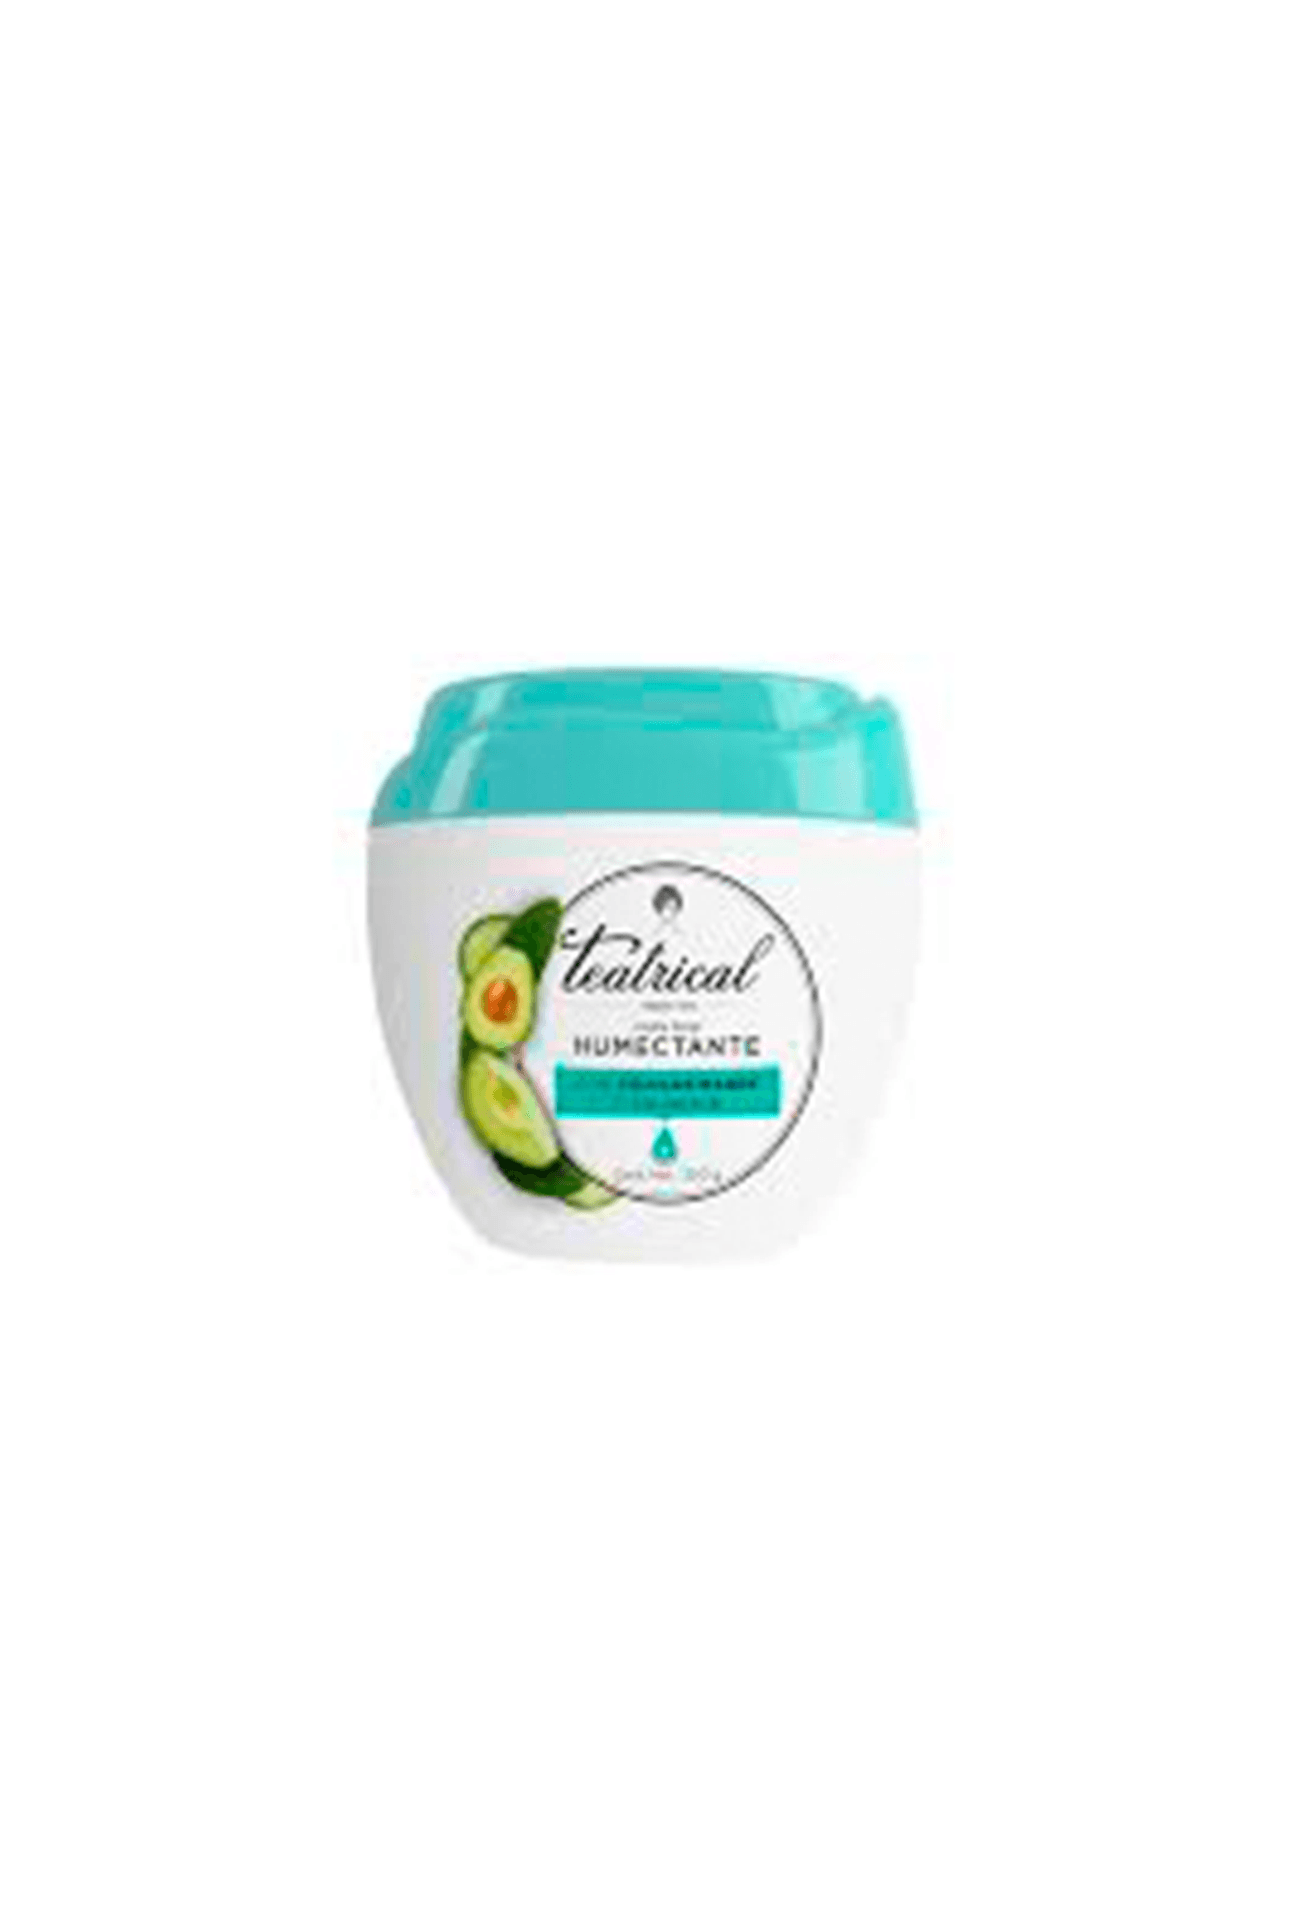 Teatrical-Crema-Facial-Teatrical-Humectante-x-200-gr-7798140257592_img1